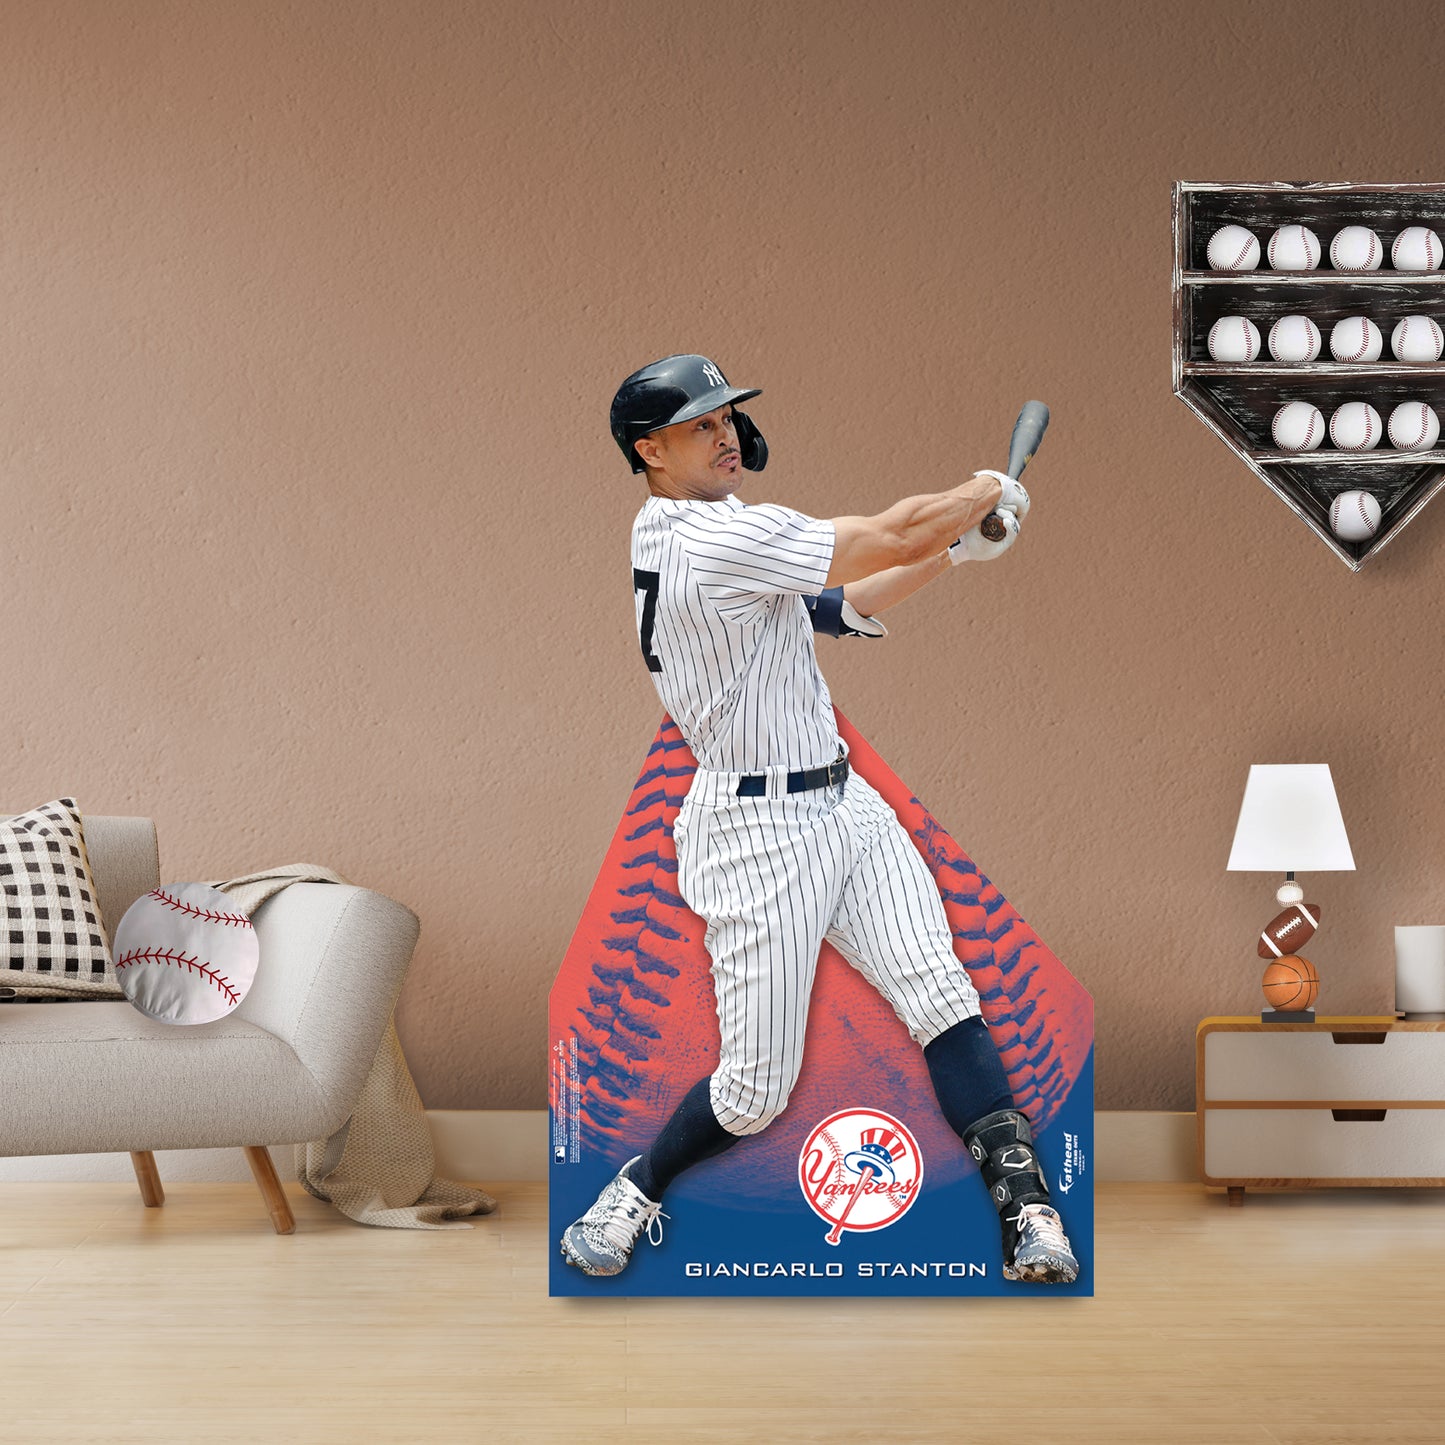 New York Yankees: Giancarlo Stanton 2022  Life-Size   Foam Core Cutout  - Officially Licensed MLB    Stand Out